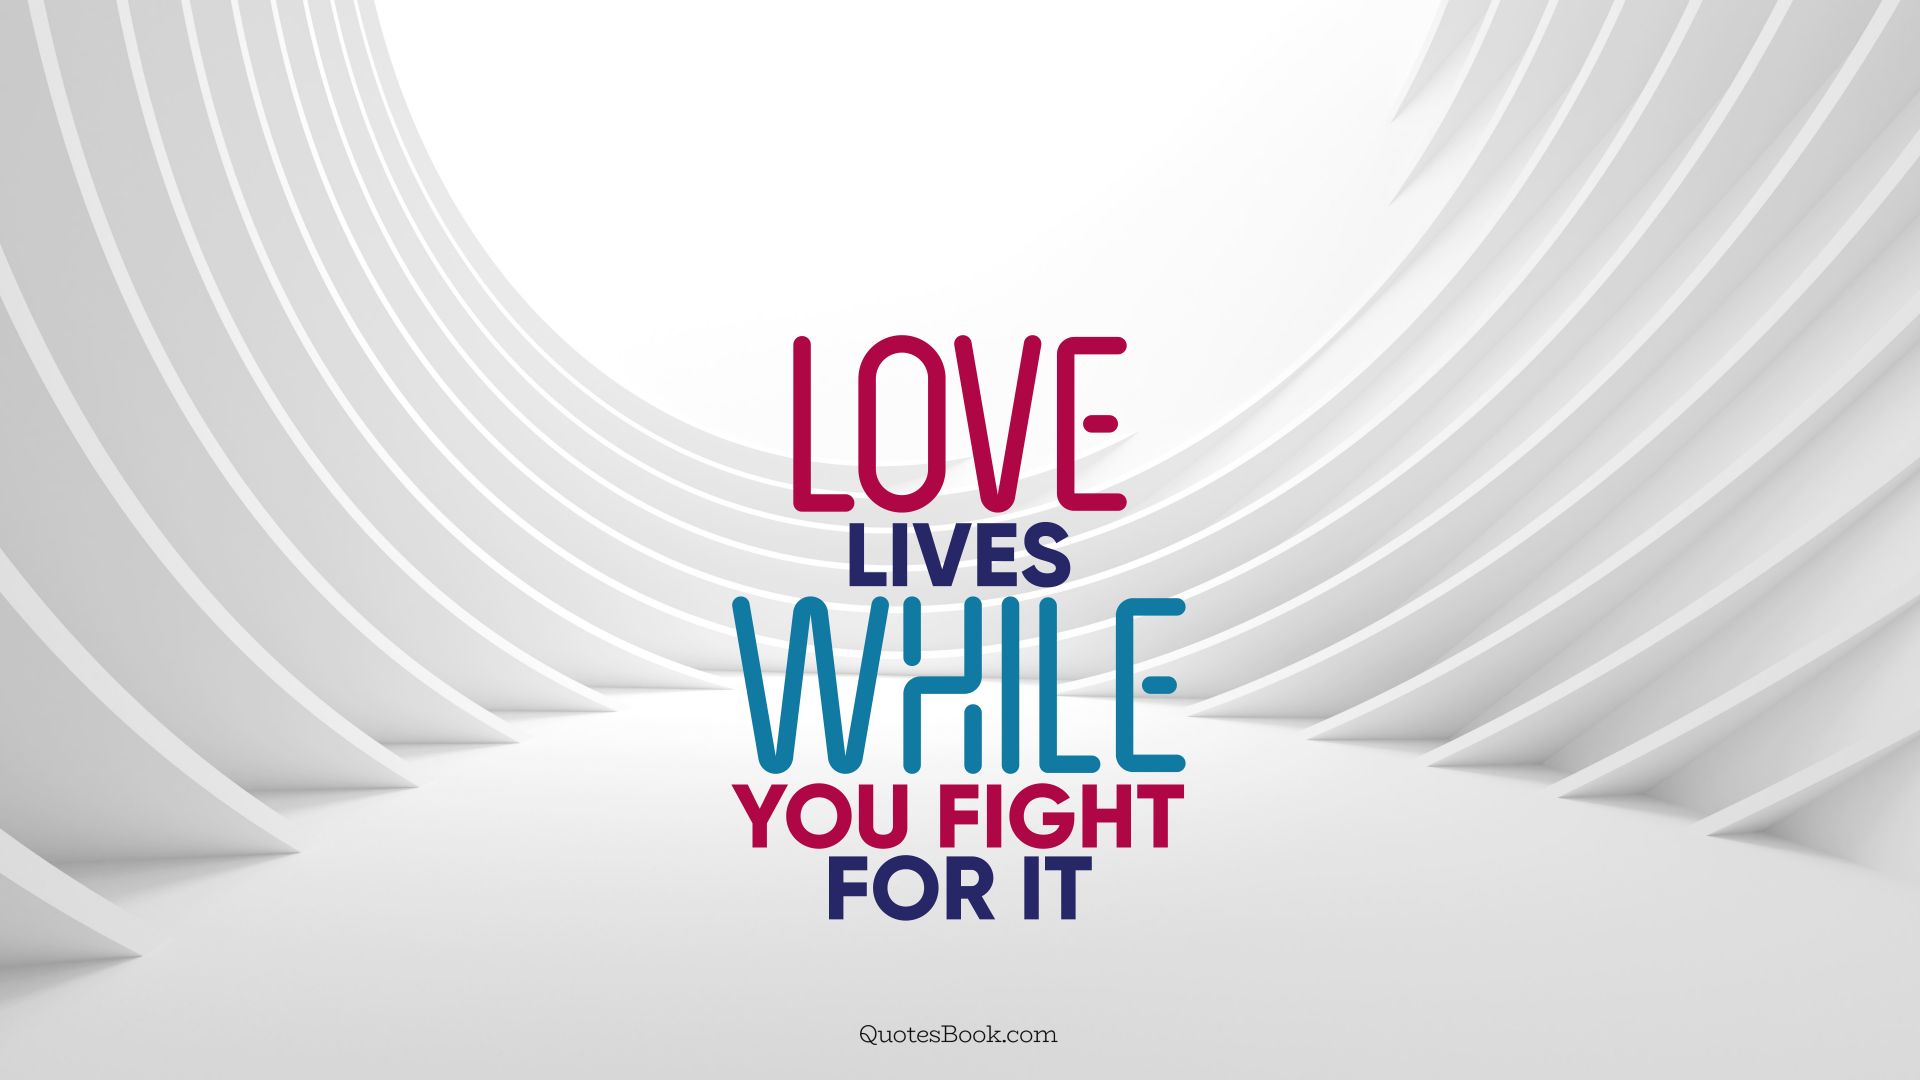 Love lives while you fight for it